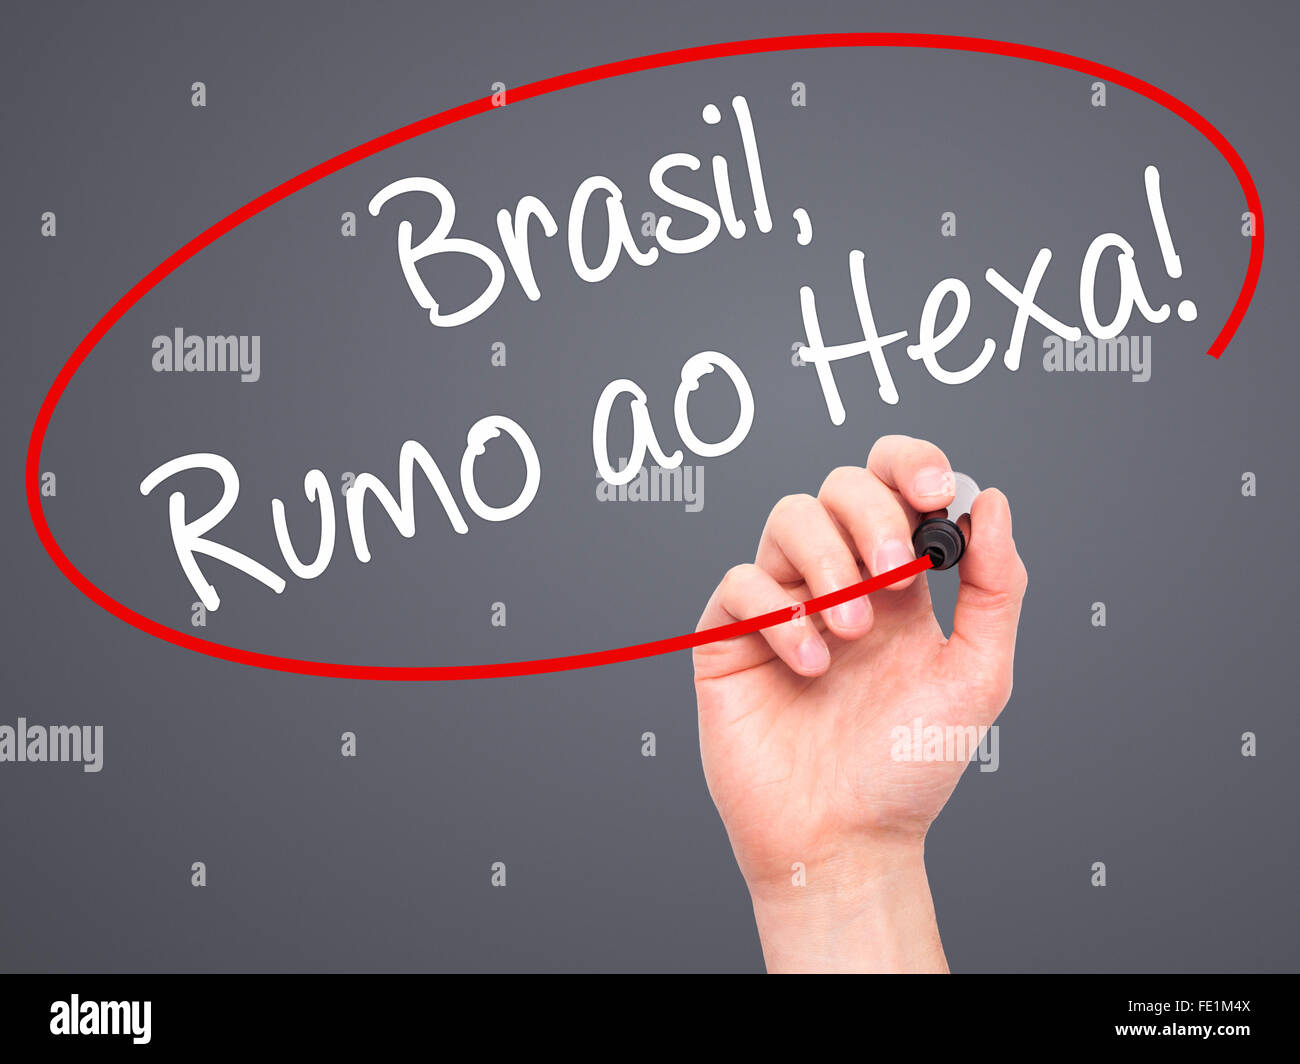 Man Hand writing Brasil, Rumo ao Hexa! with black marker on visual screen. Isolated on background. Business, technology, interne Stock Photo